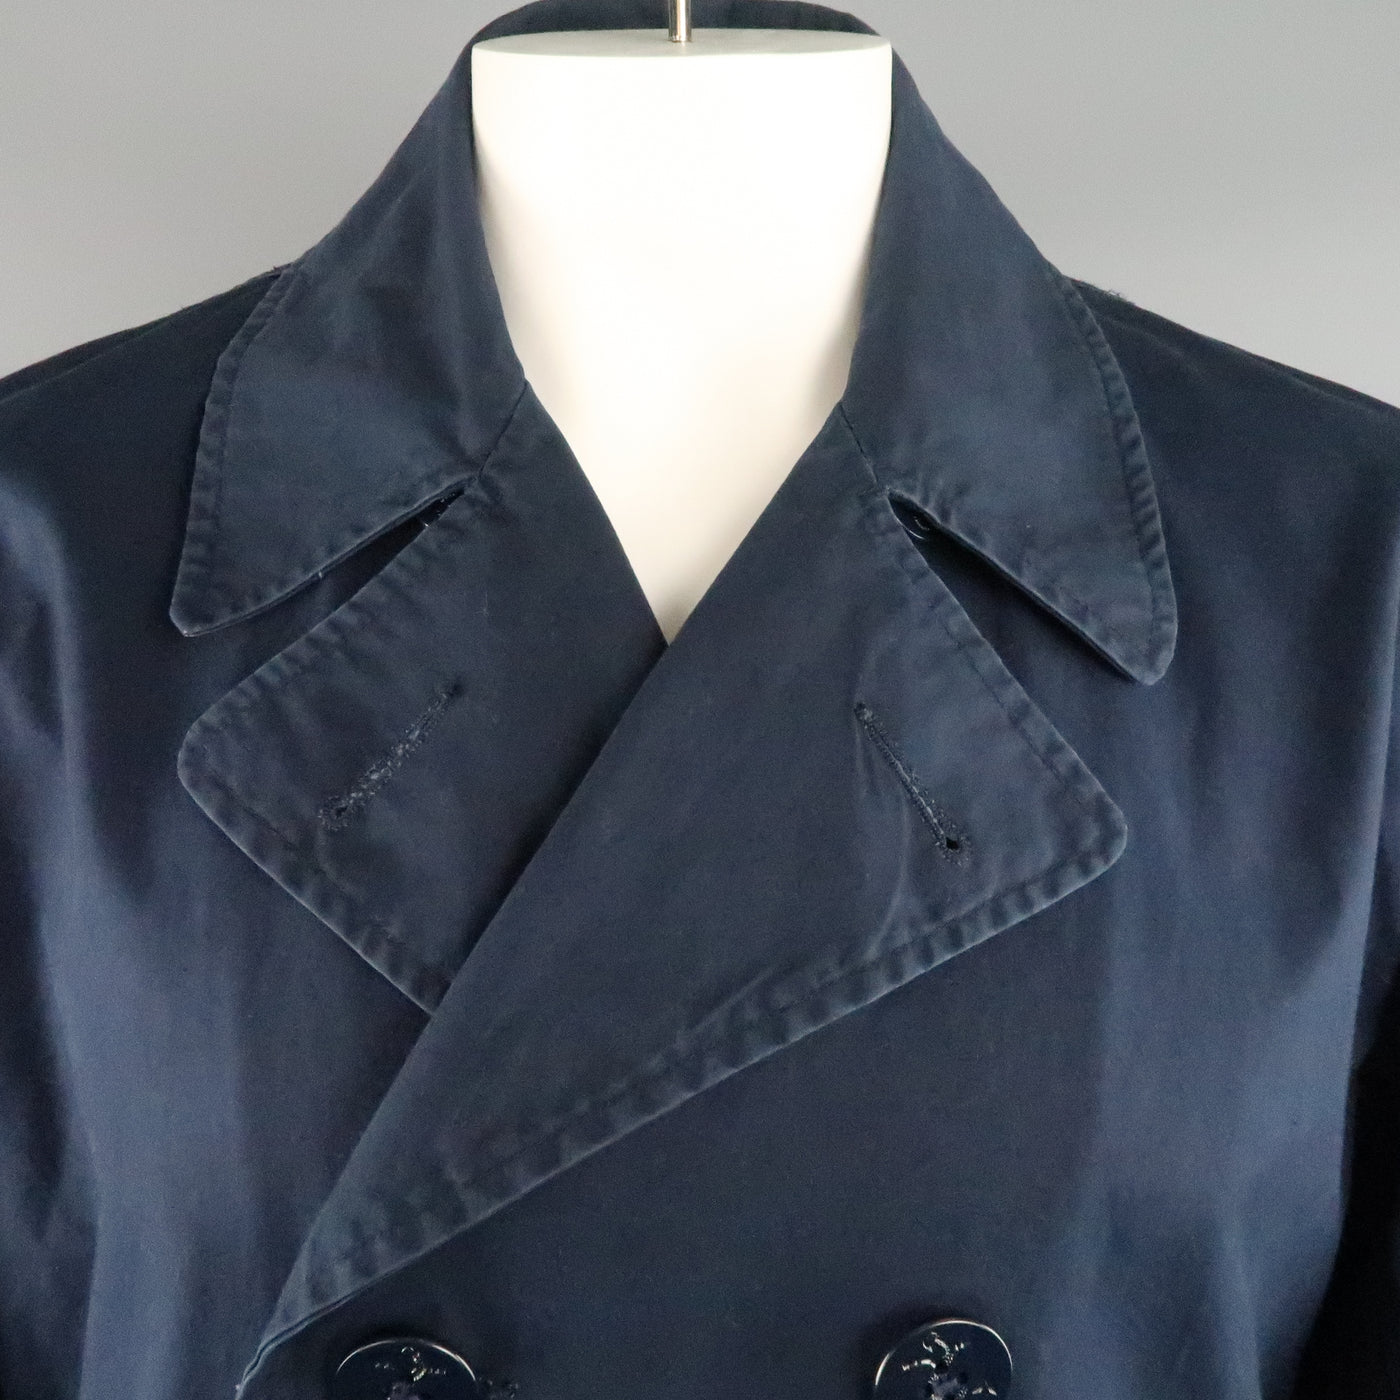 JUNYA WATANABE L Navy Solid Cotton Double Breasted Peacoat Jacket